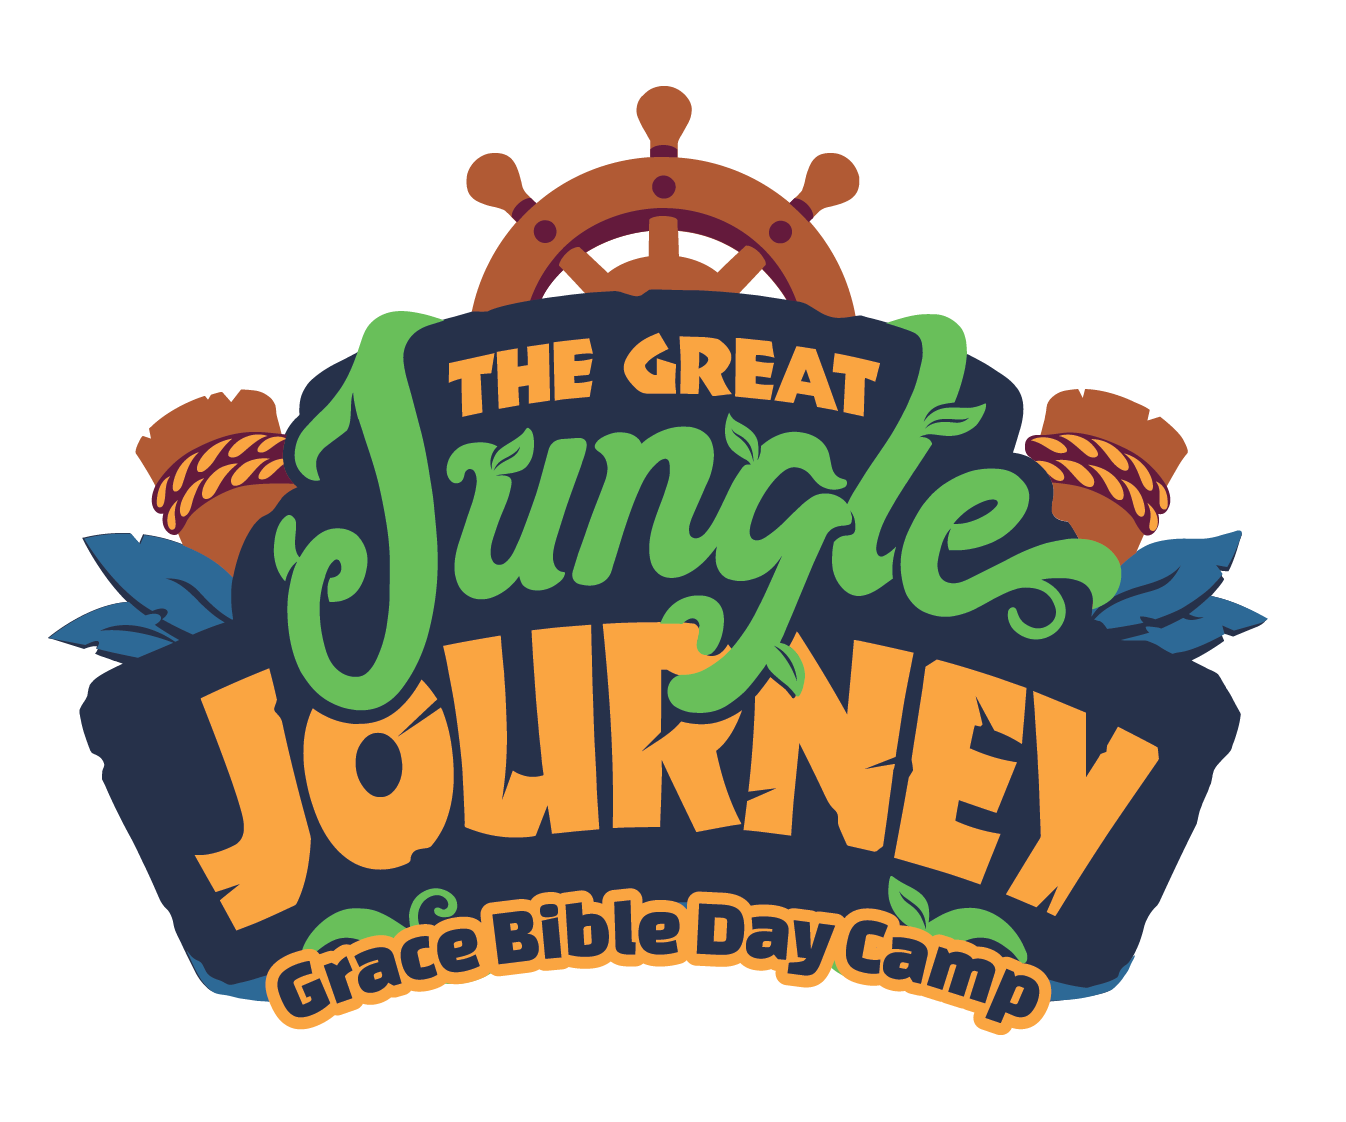 Grace Bible Day Camp (Junior)